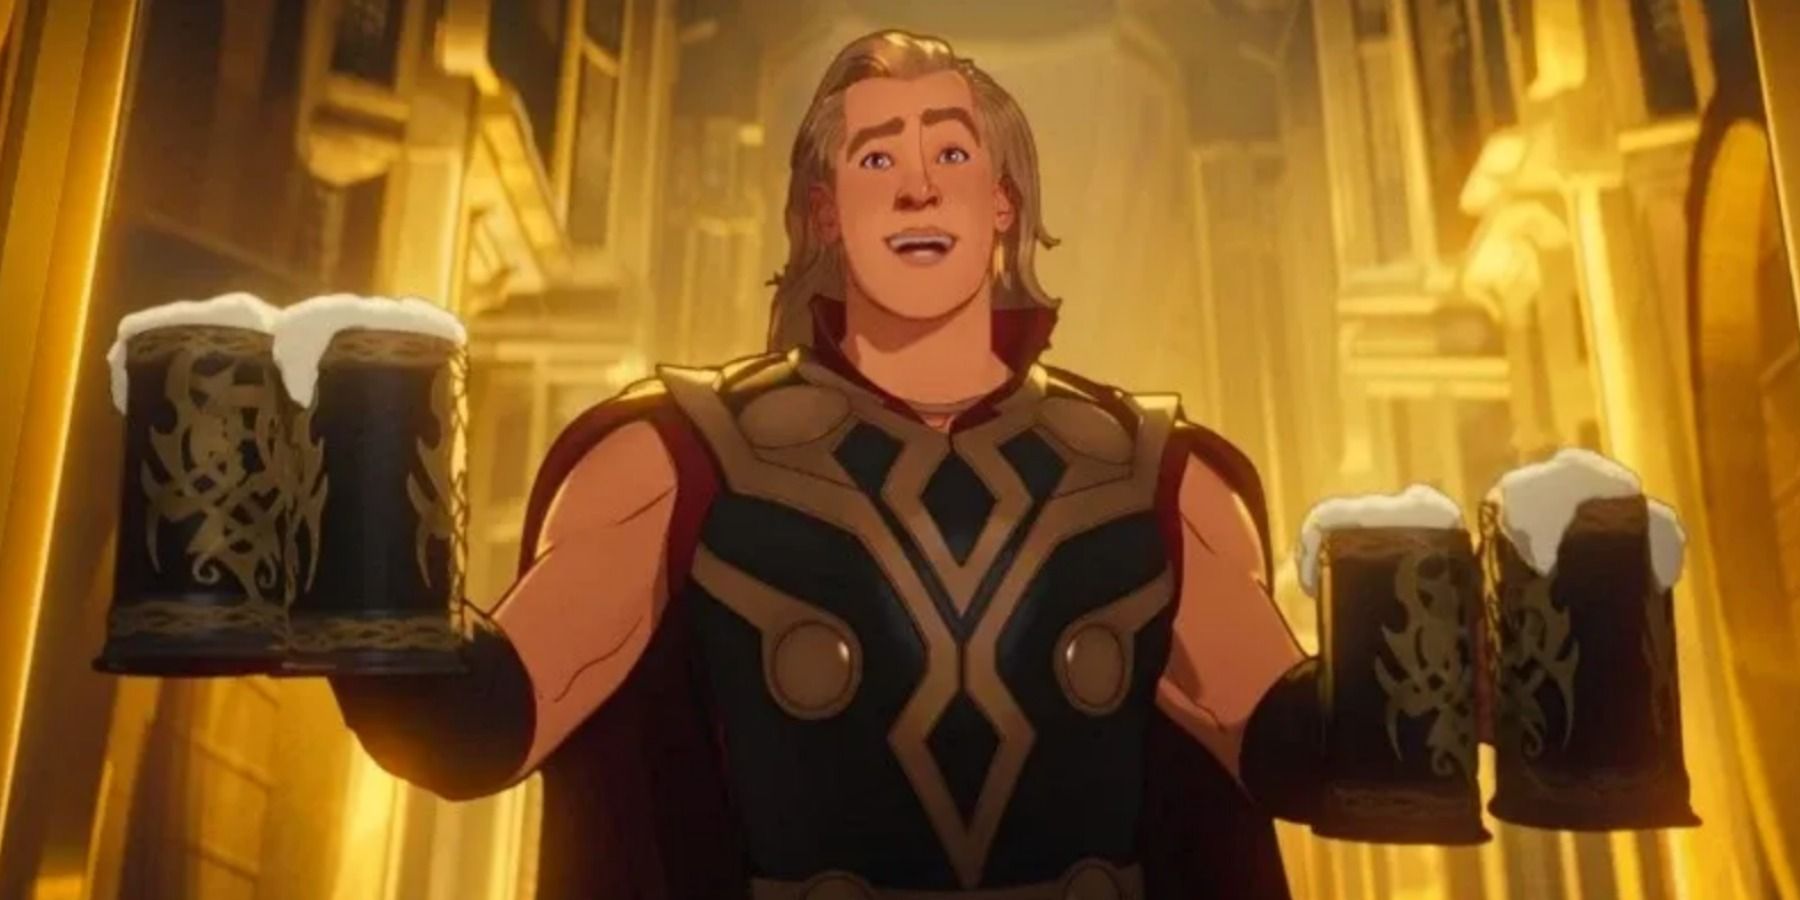 Thor carries four beer mugs in What If Episode 7